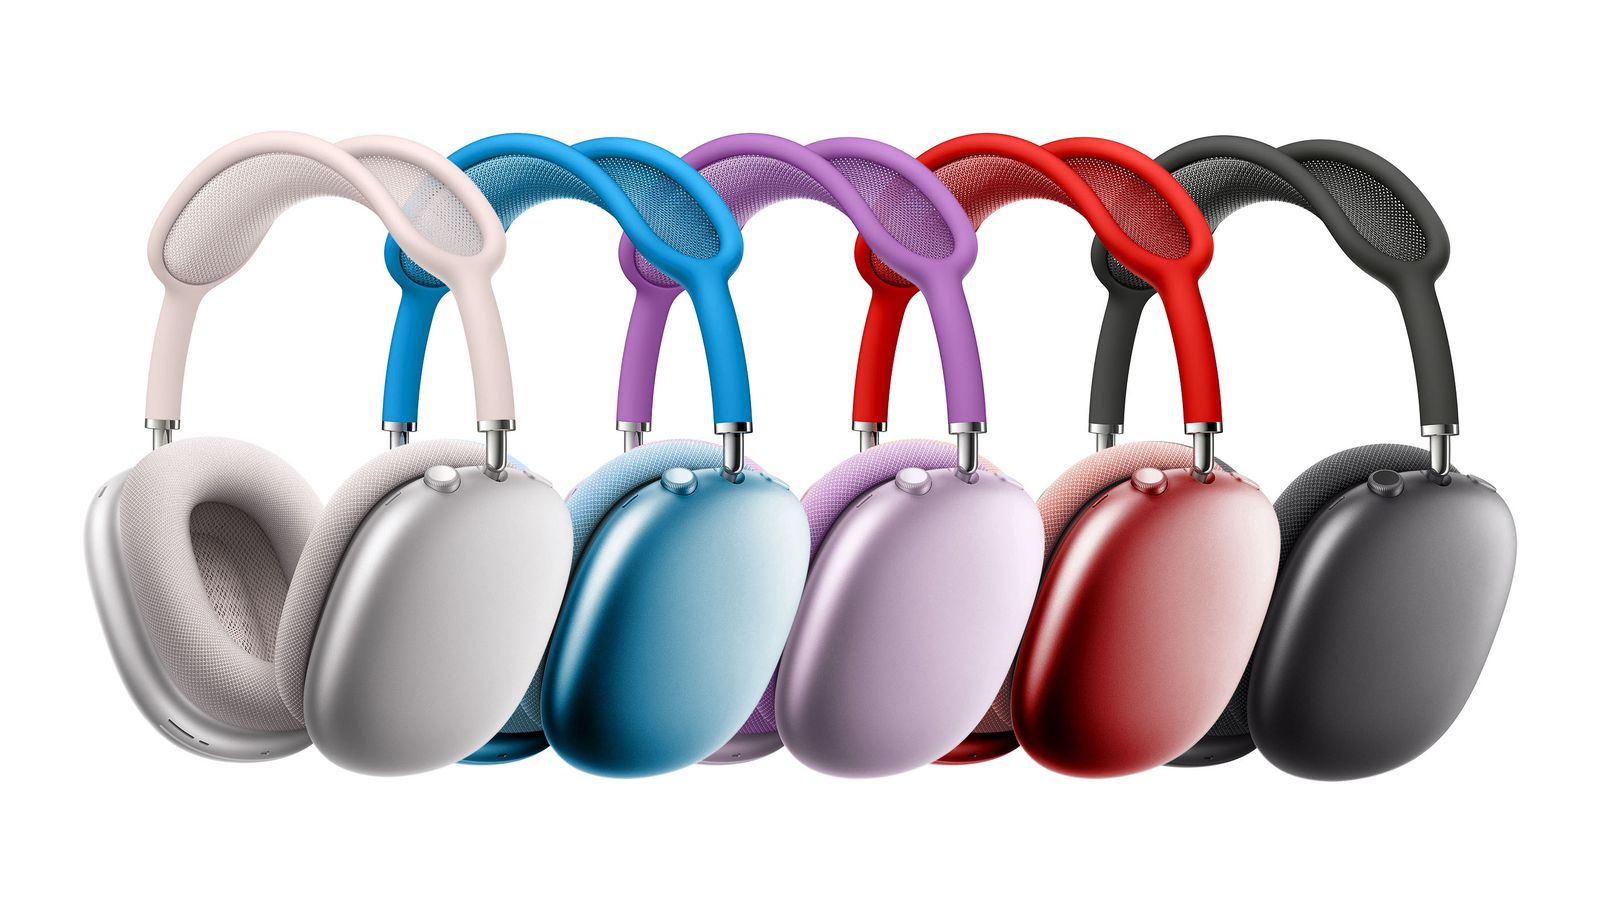 What New AirPods Max Colors Could Be Coming? - MacRumors